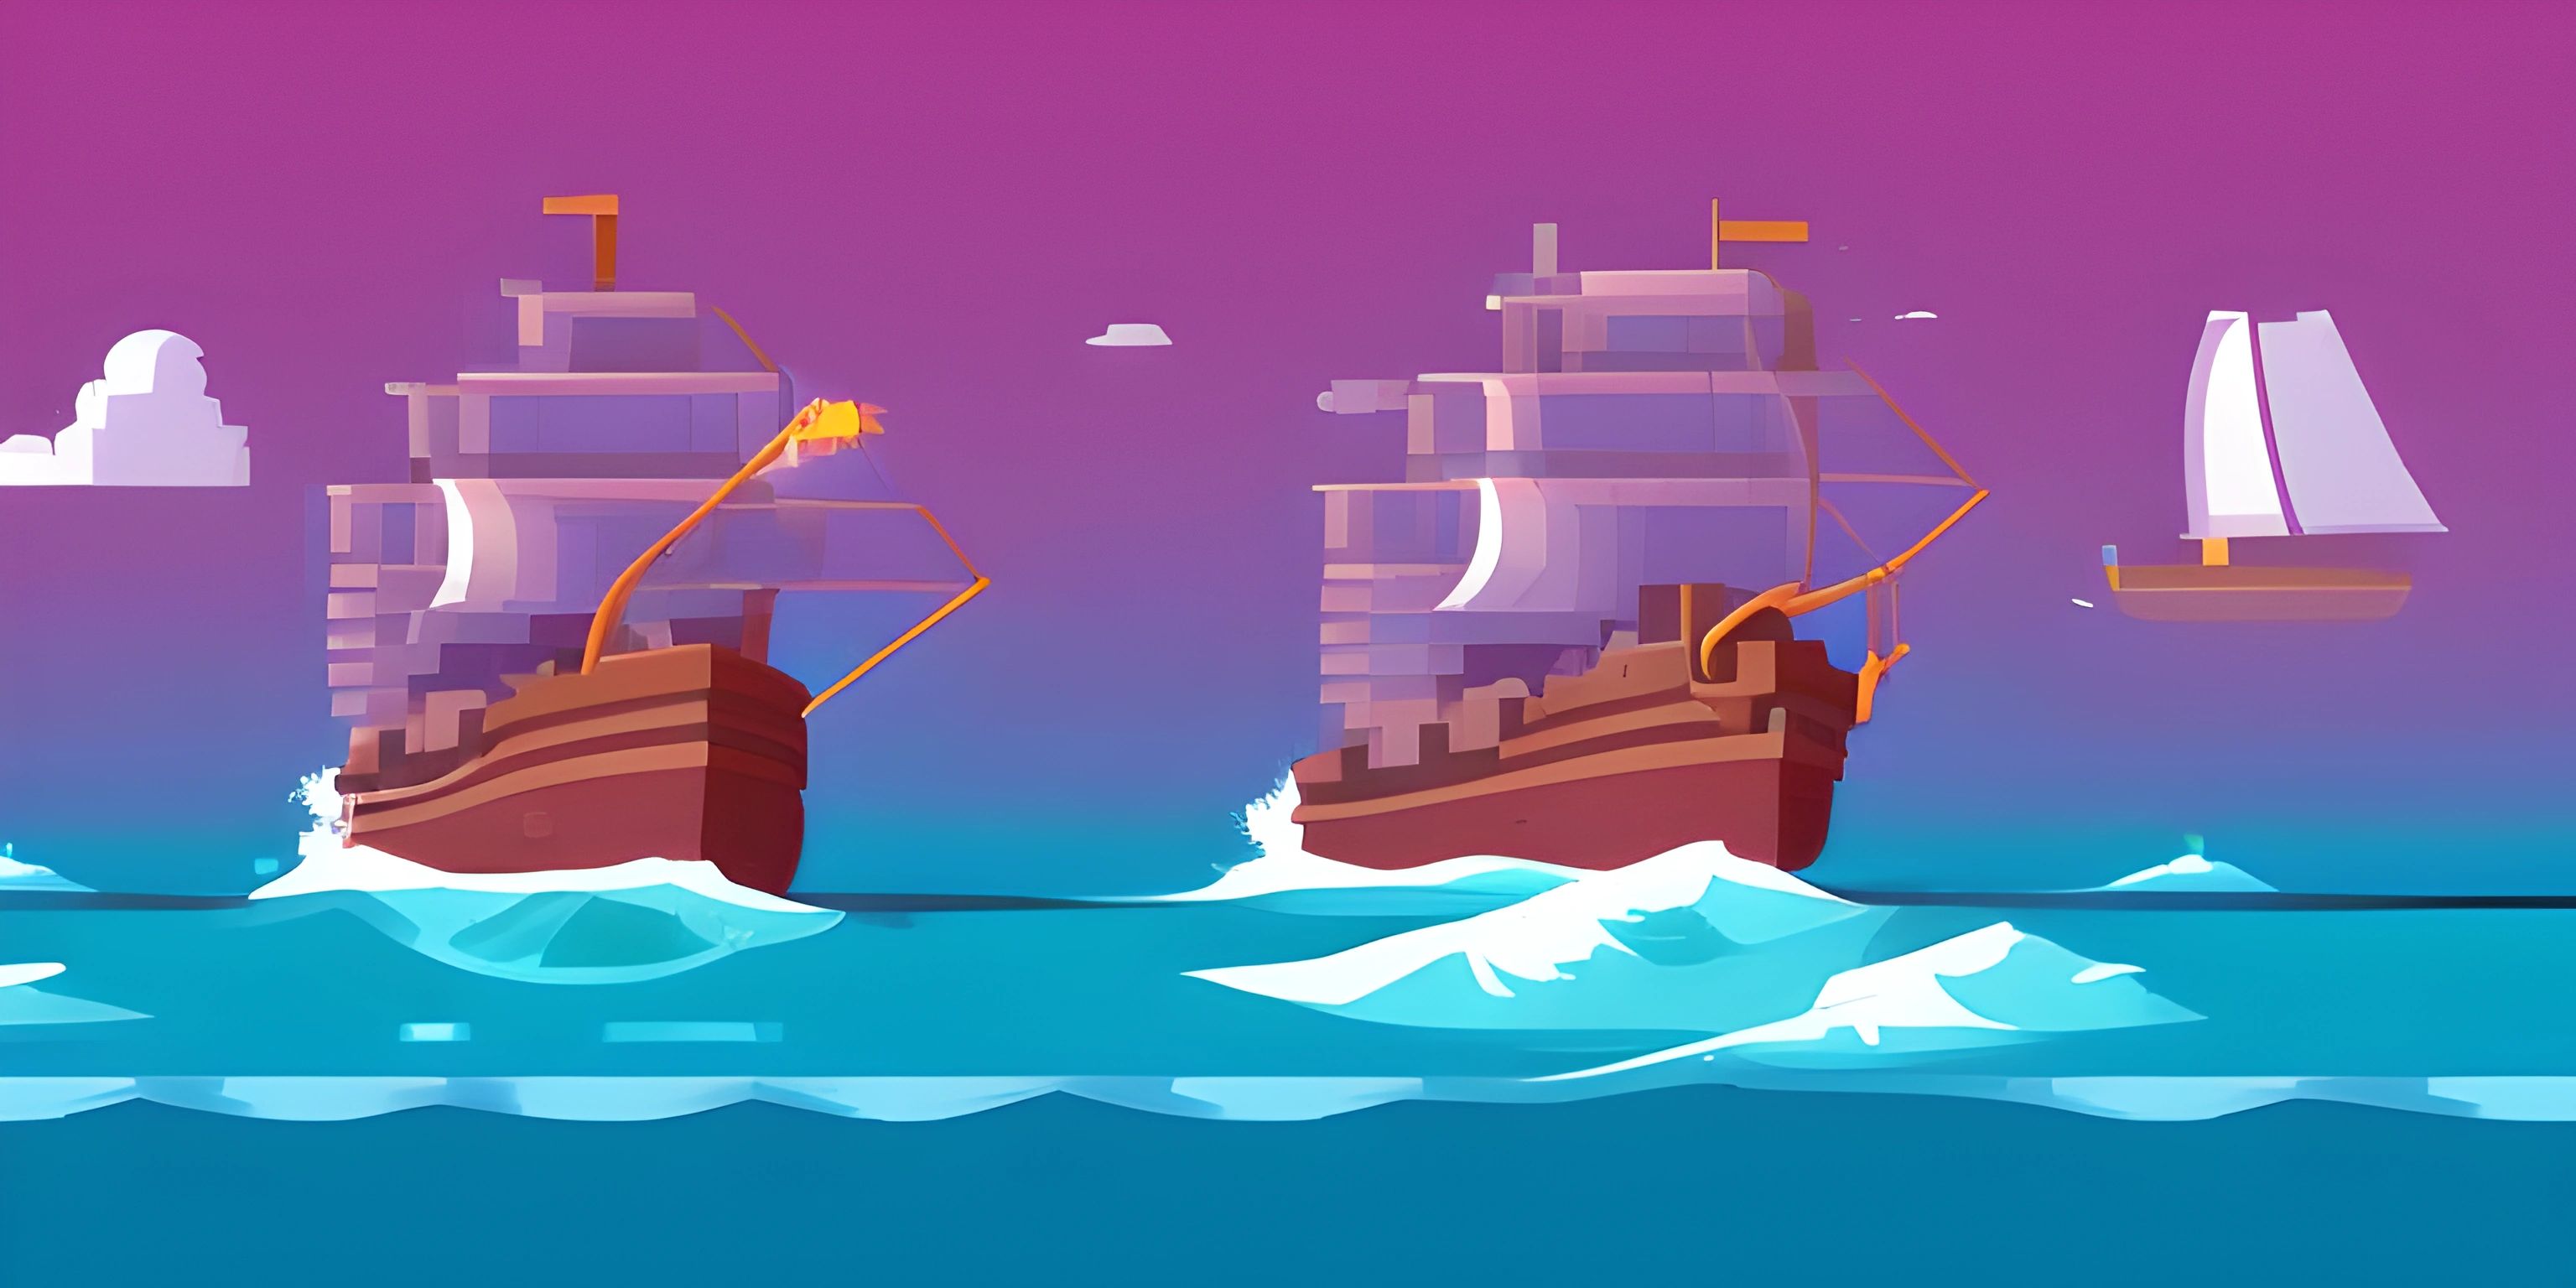 two ships in the ocean with snow and rocks in the background in an animated style